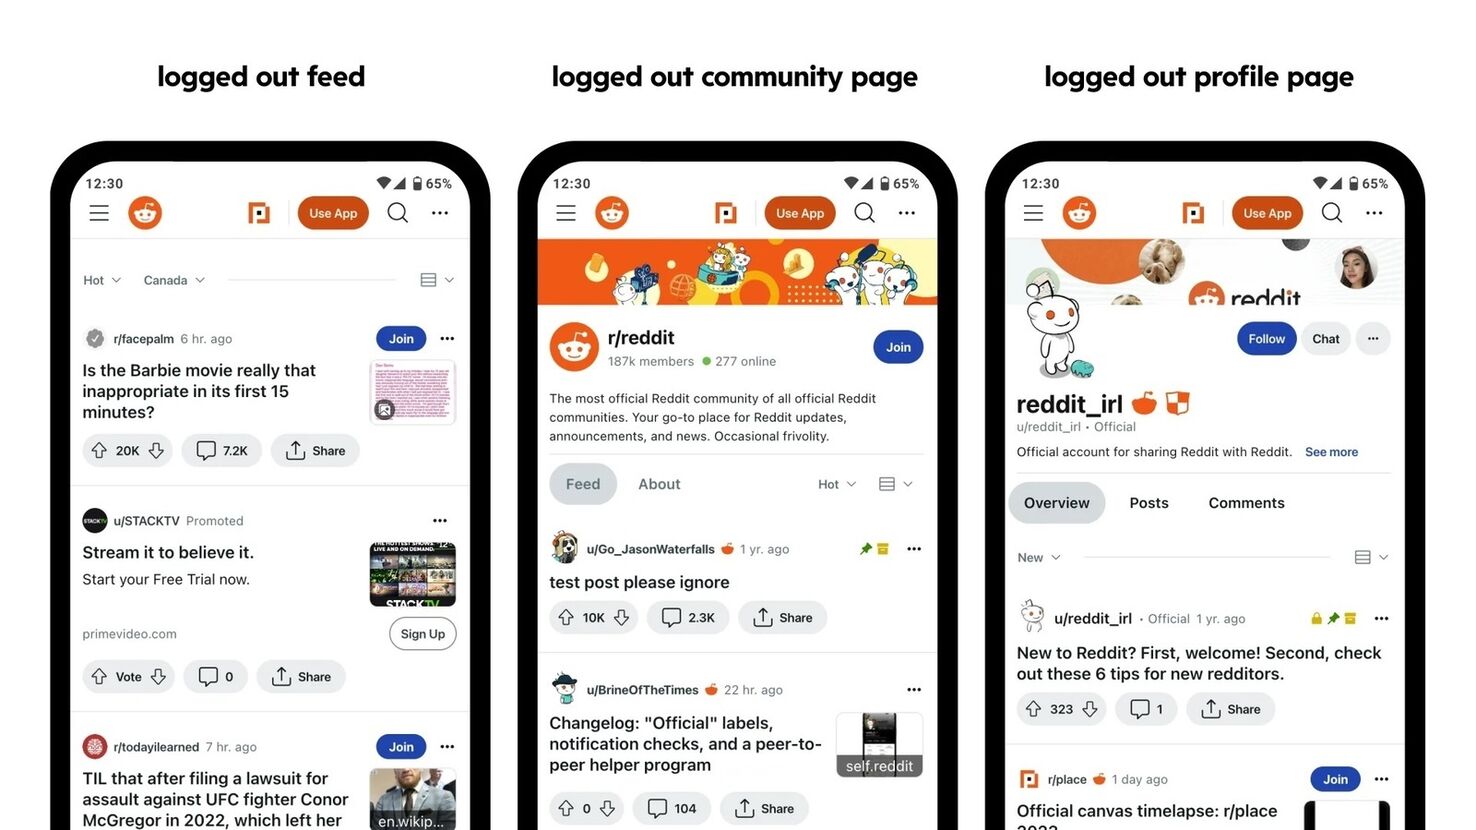 Reddit Updates its Design to Improve the Logged out User